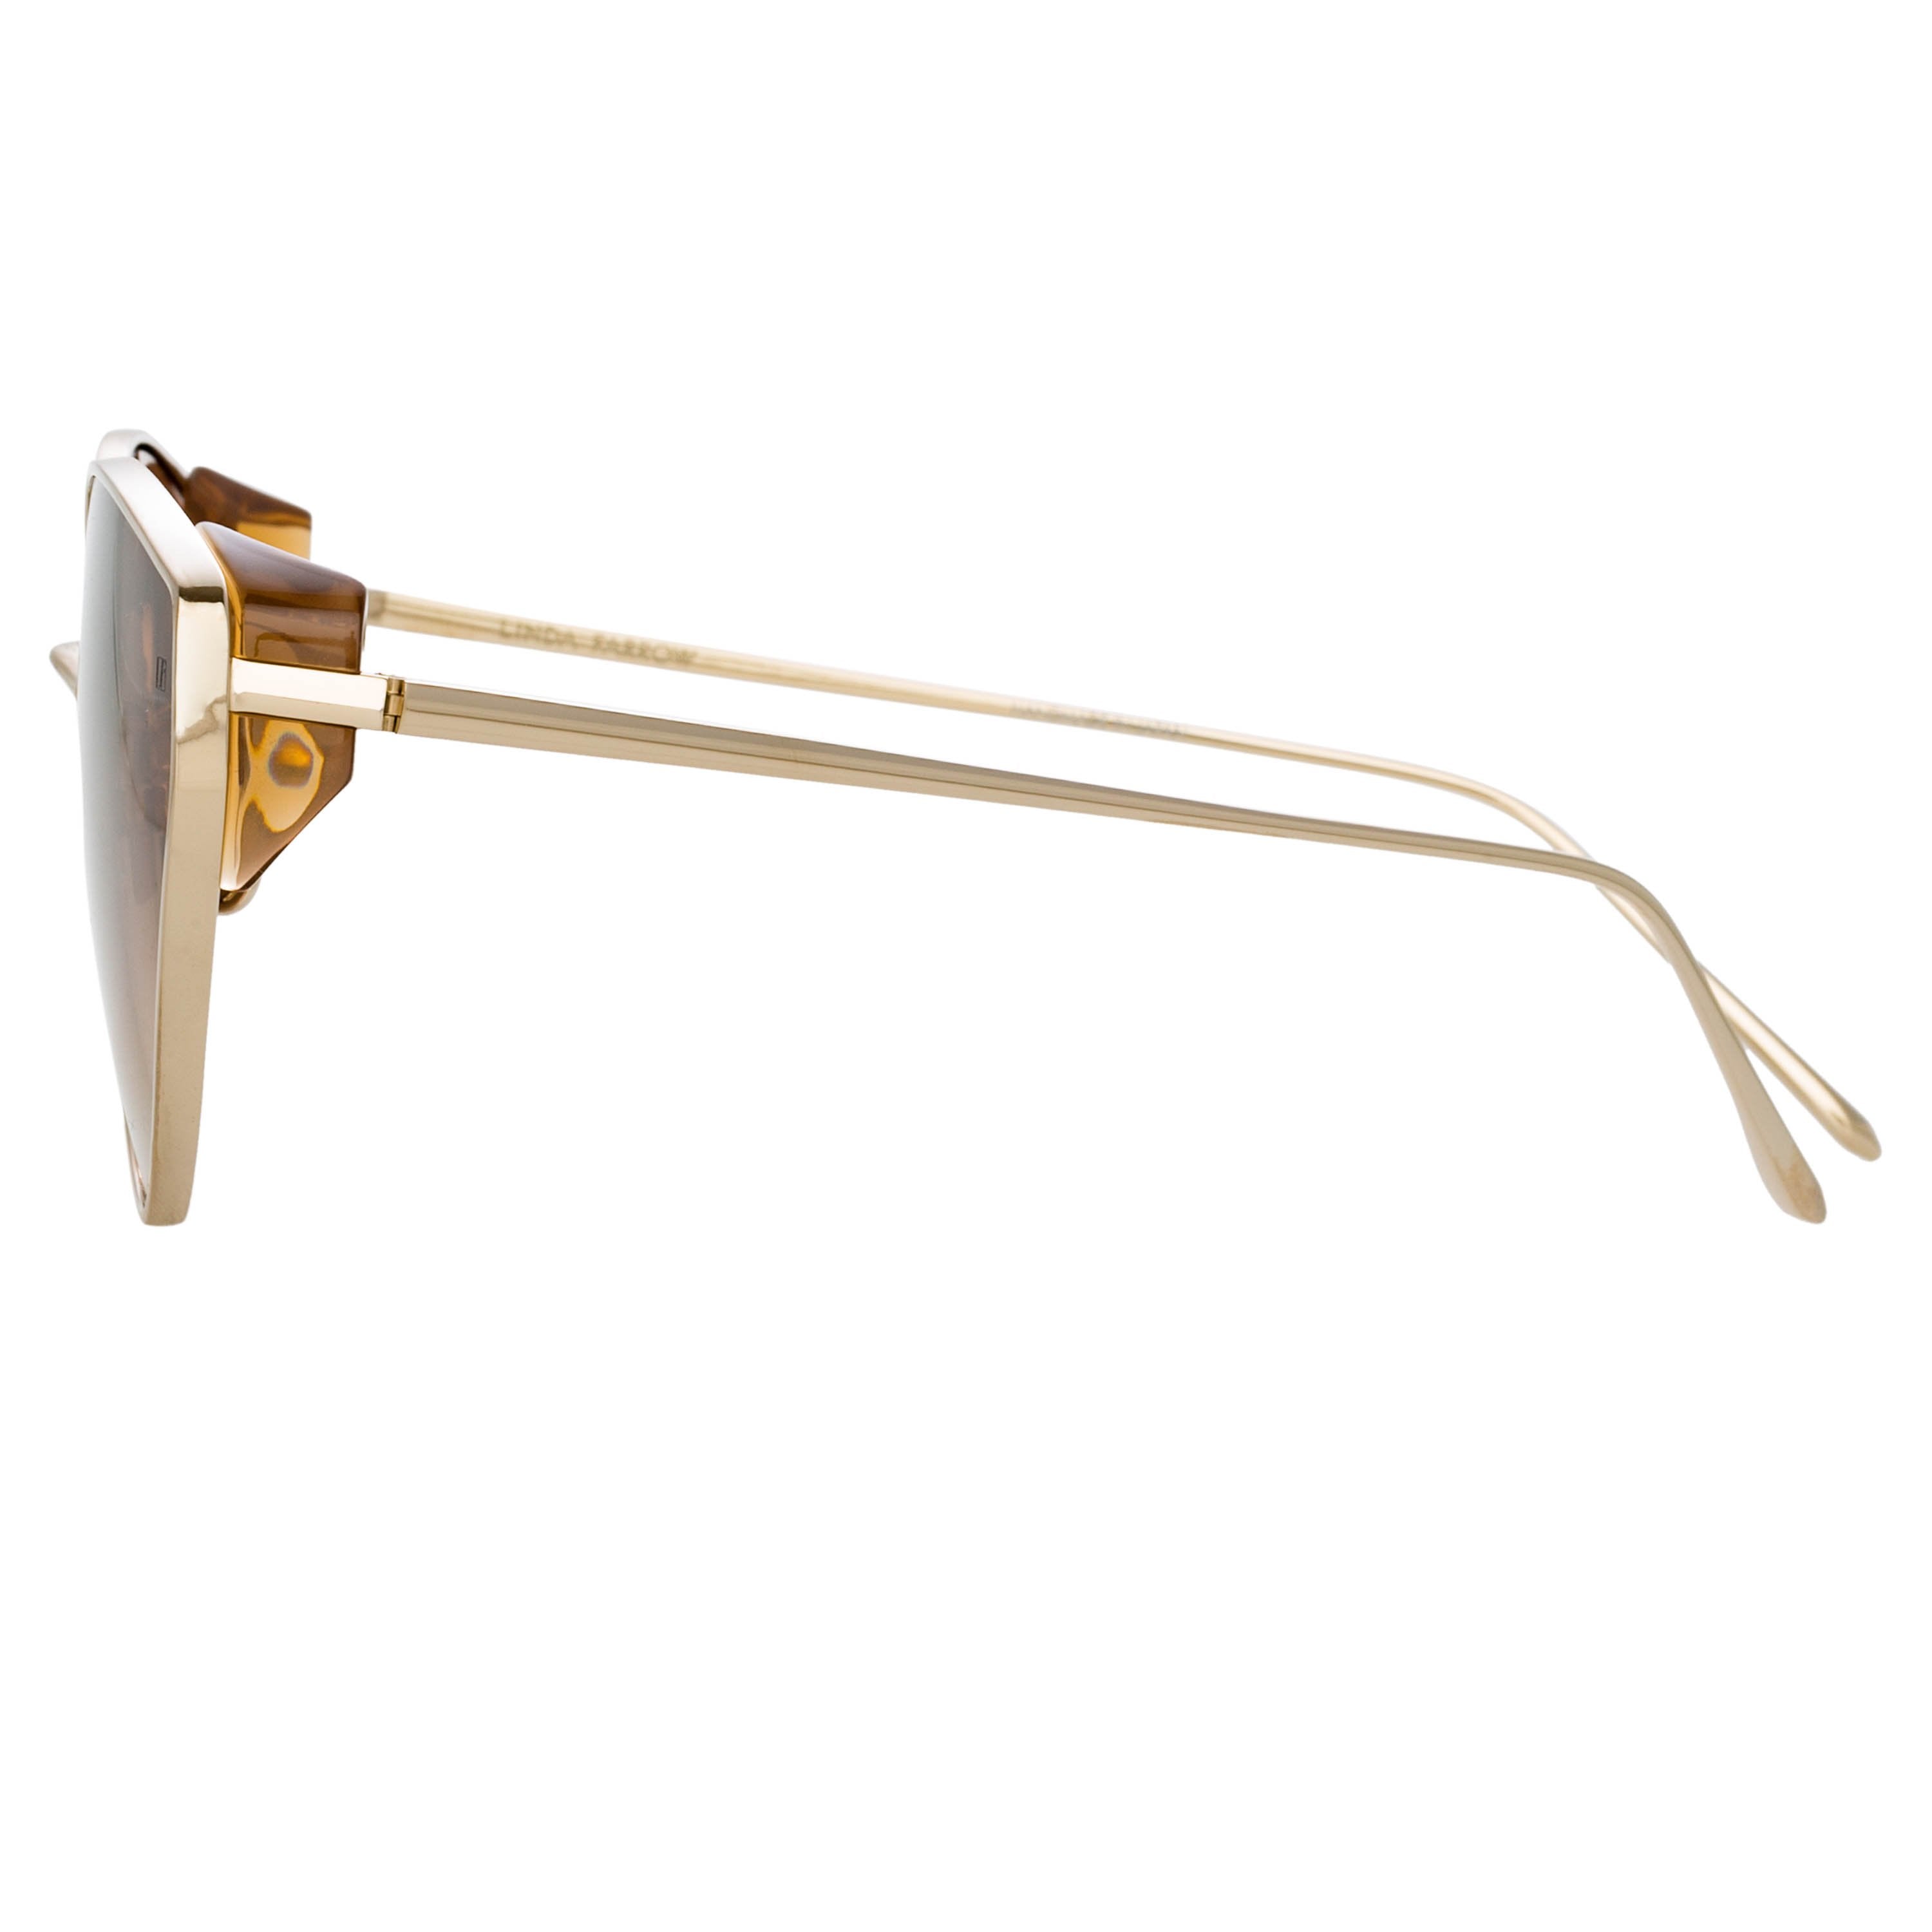 Color_LFL1029C2SUN - Liv Cat Eye Sunglasses in Light Gold and Brown